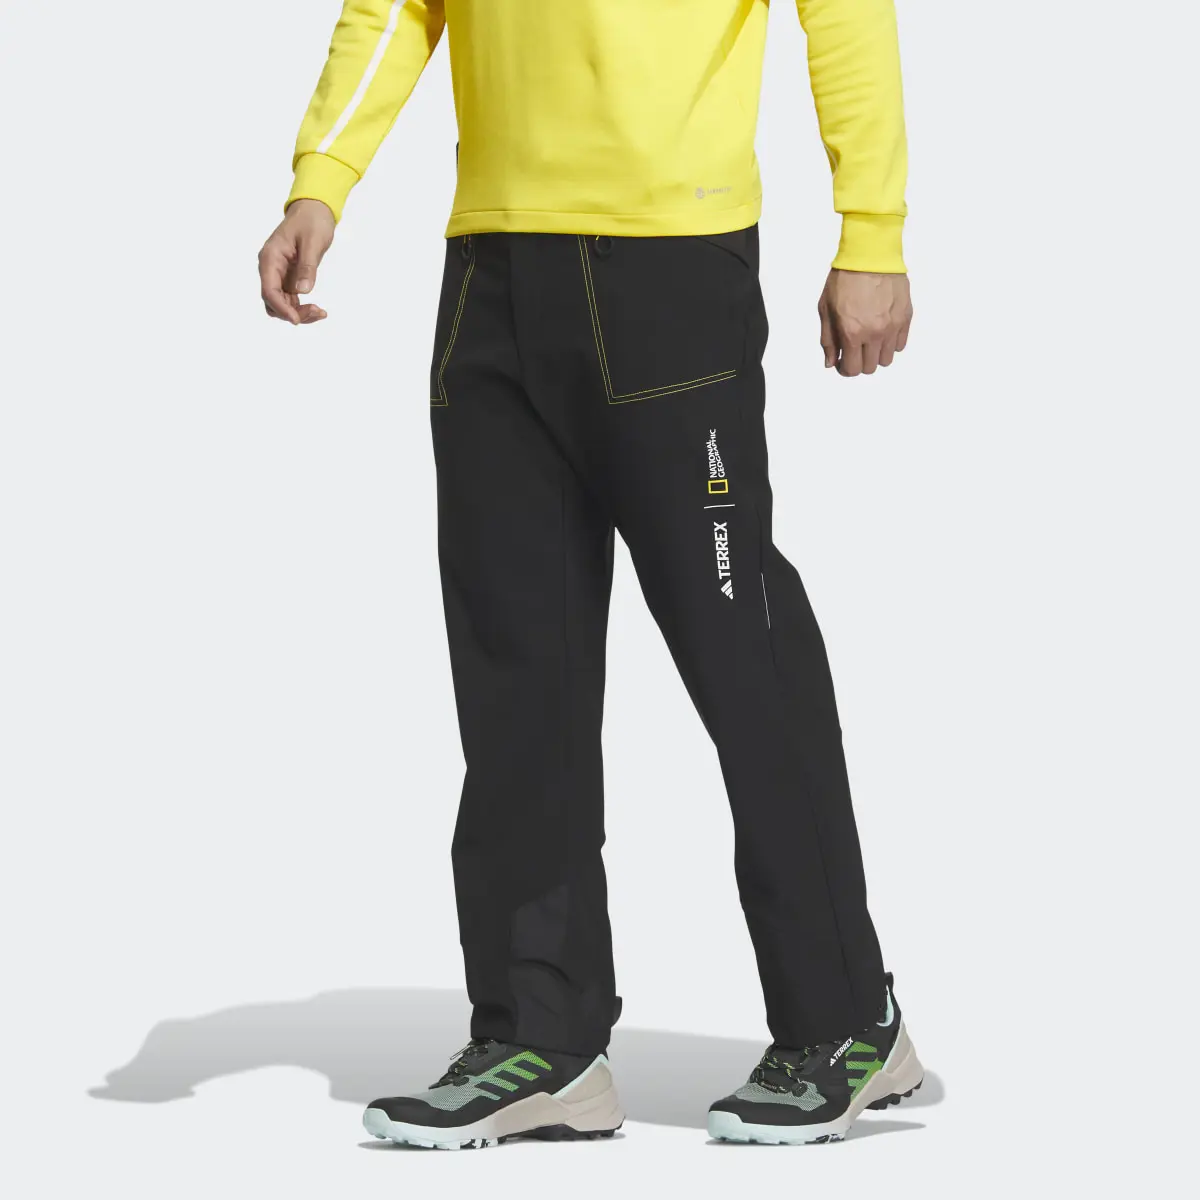 Adidas Pants National Geographic Soft Shell. 1